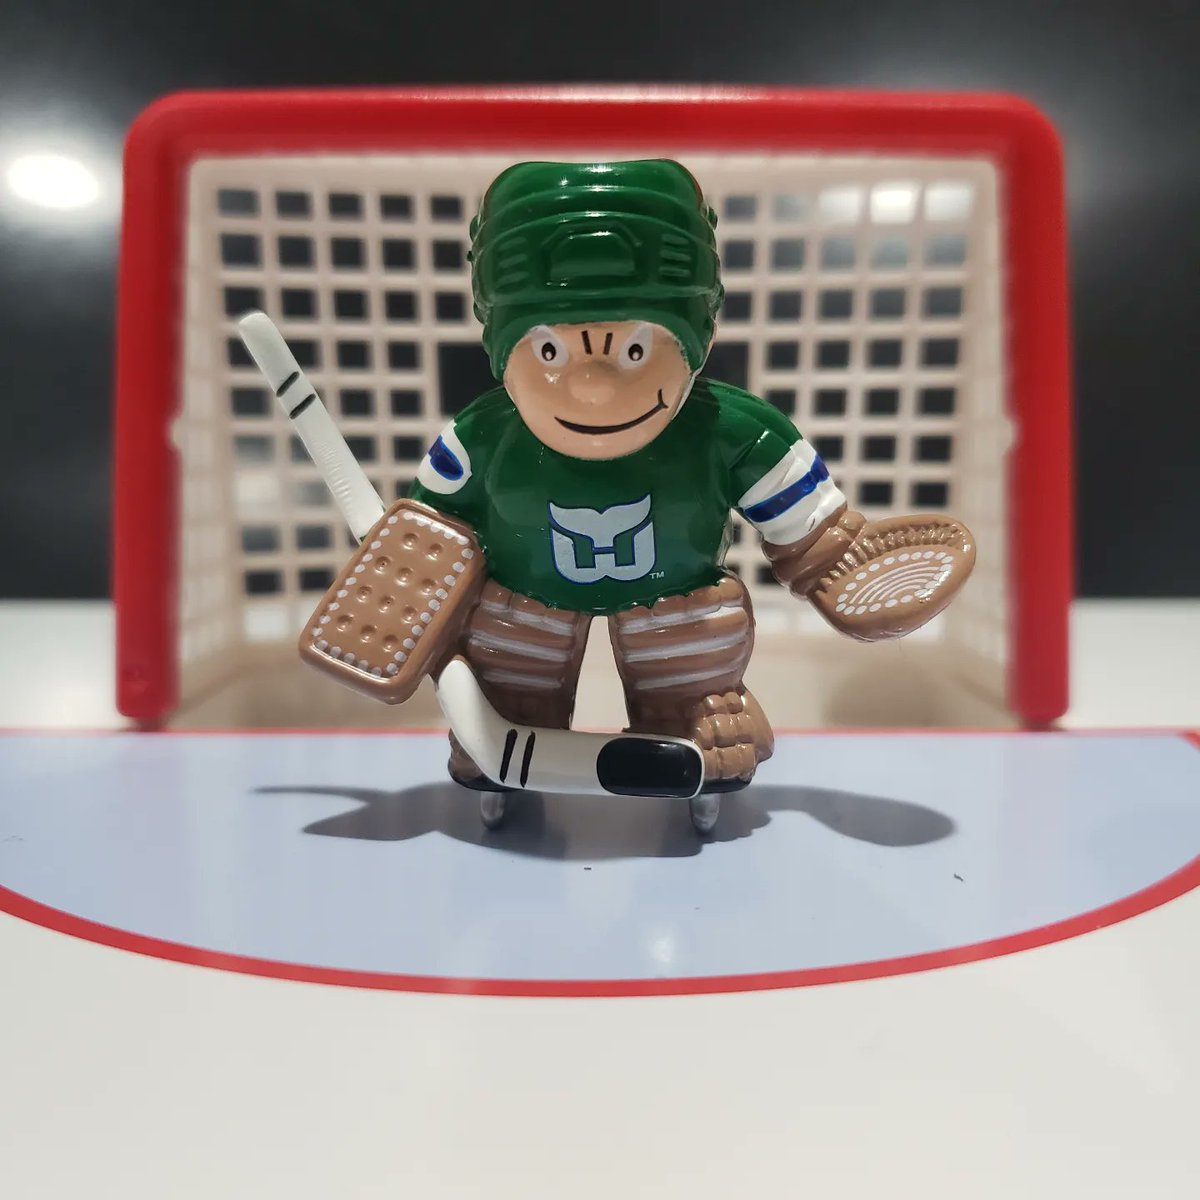 The year is almost over. Let's end it with the best #lilsportsbrat in the collection #hartfordwhalers